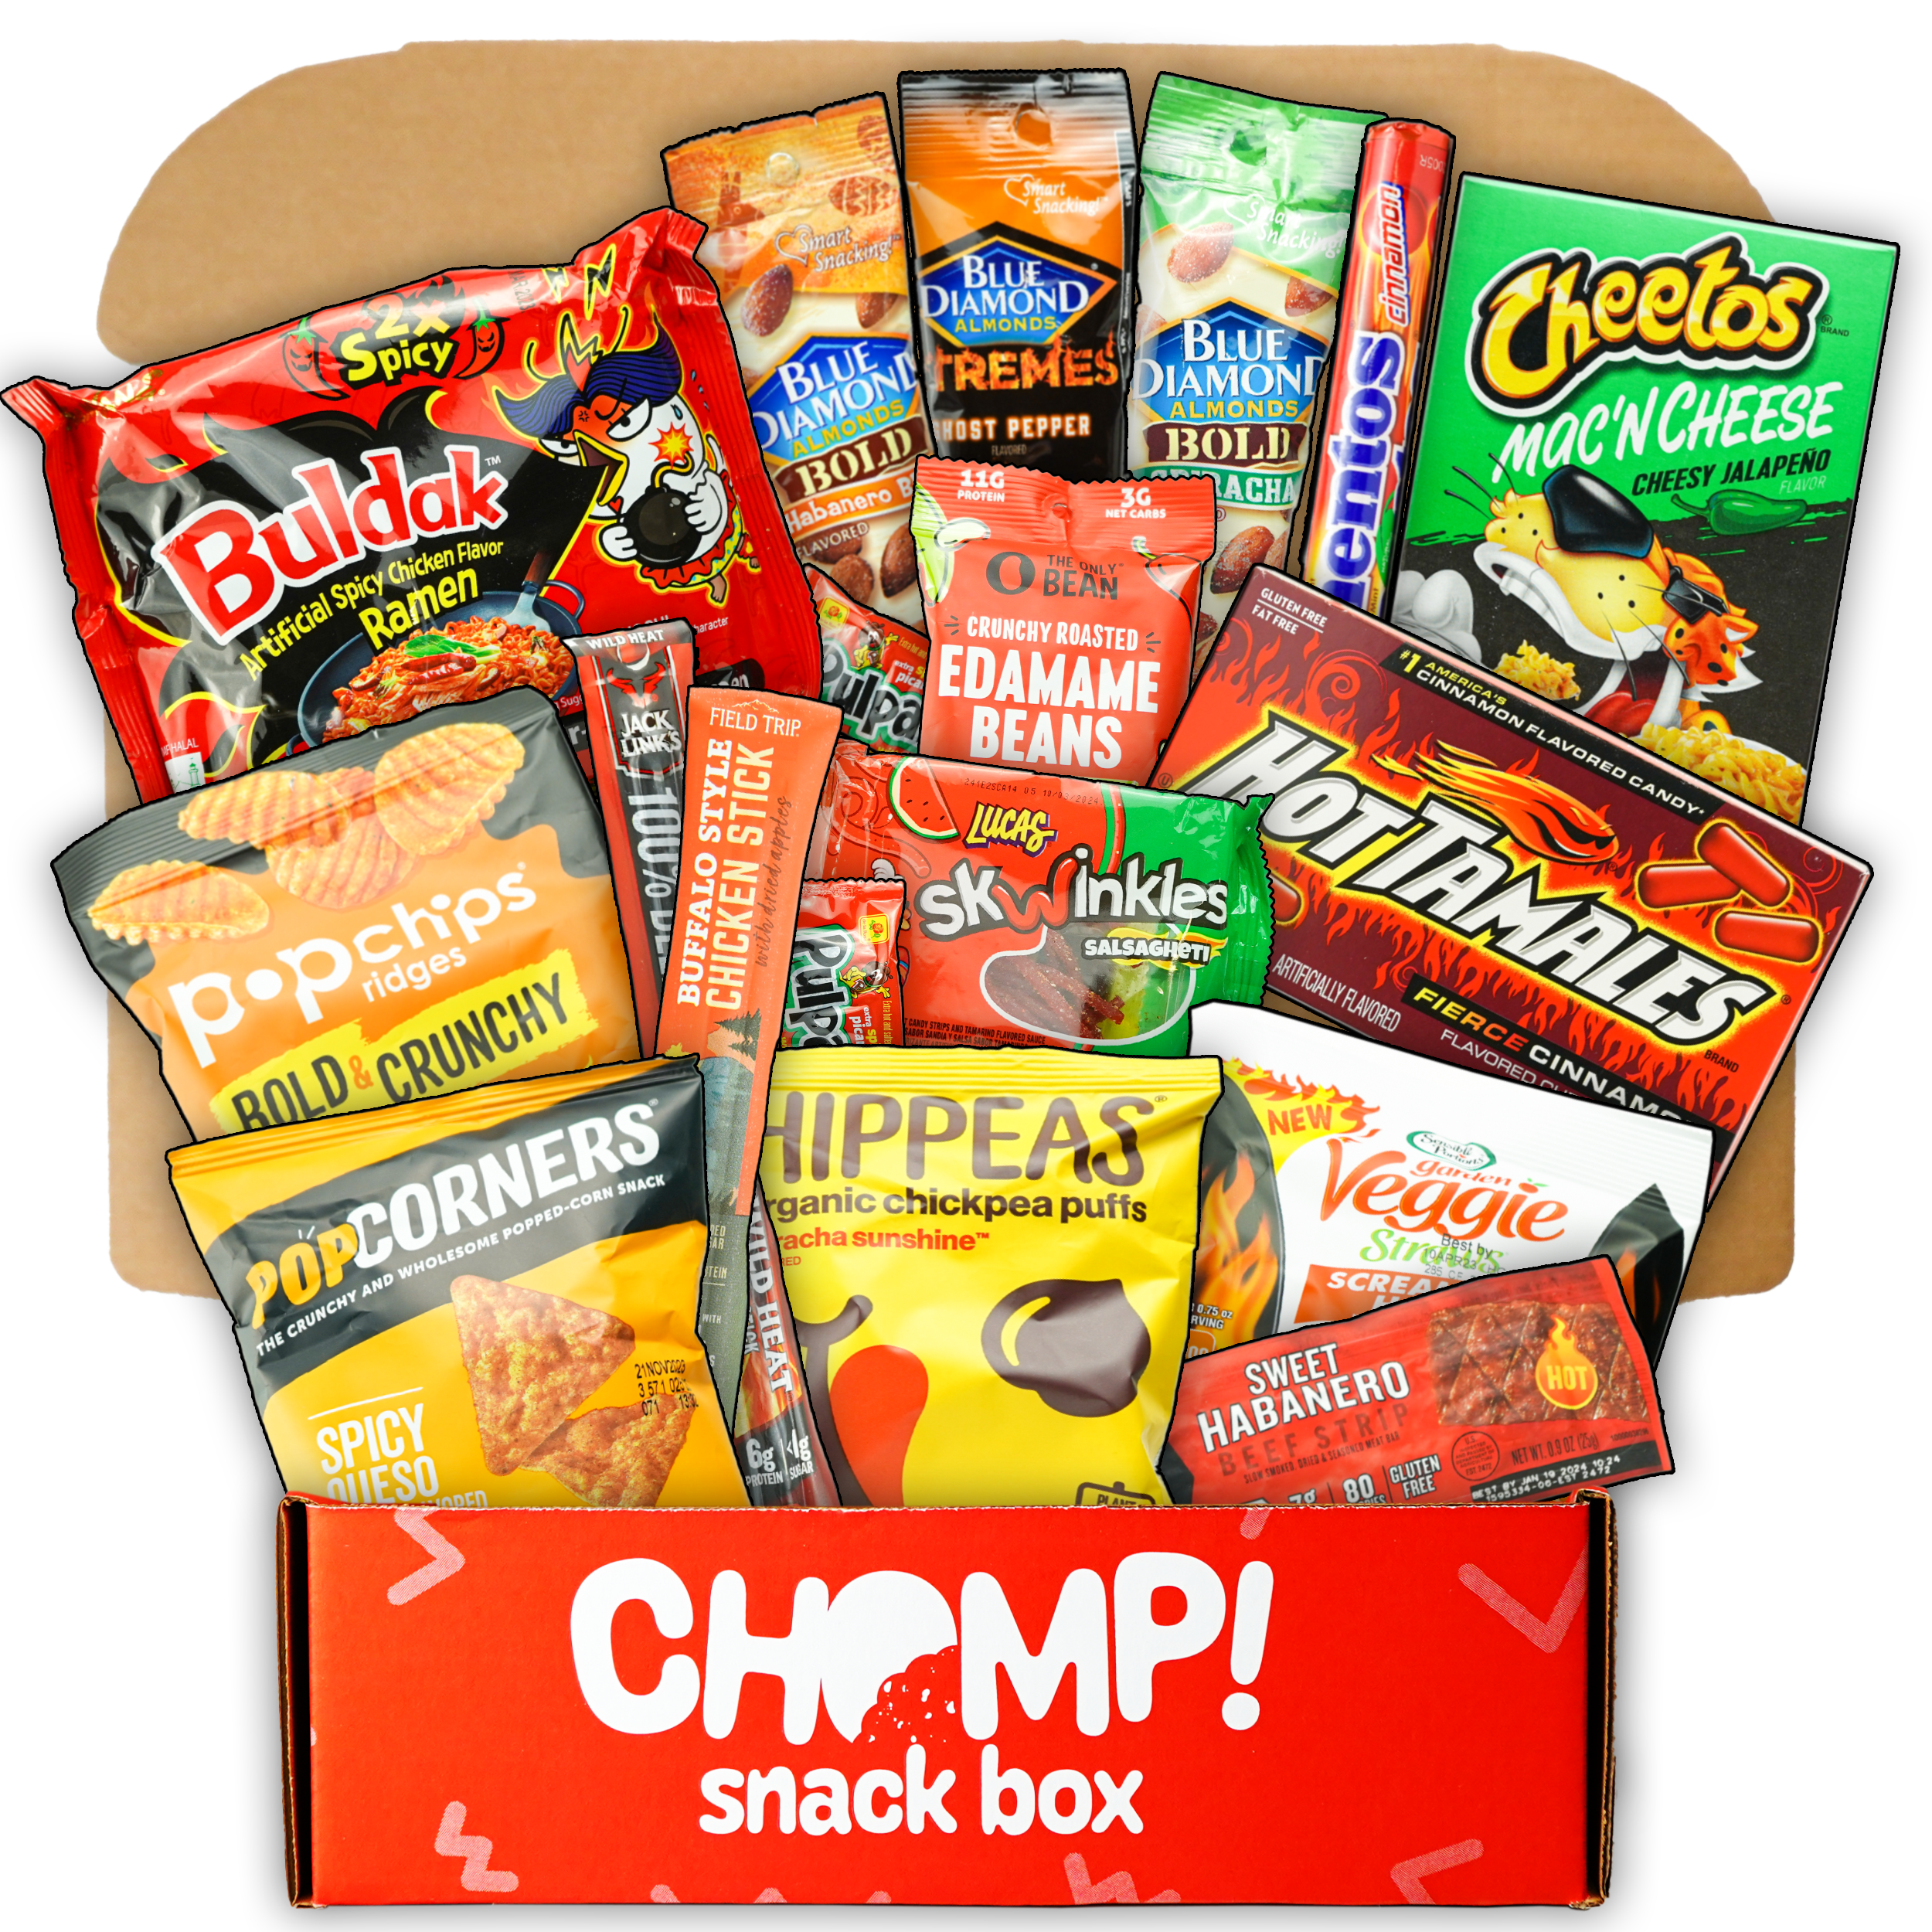 subscription snack box, snack box, assorted snacks, monthly snack box, spicy snack box, spicy subscription snack box, snacking, spicy snacks, spicy snacks box, chomp snack box, elijah's xtreme snack box